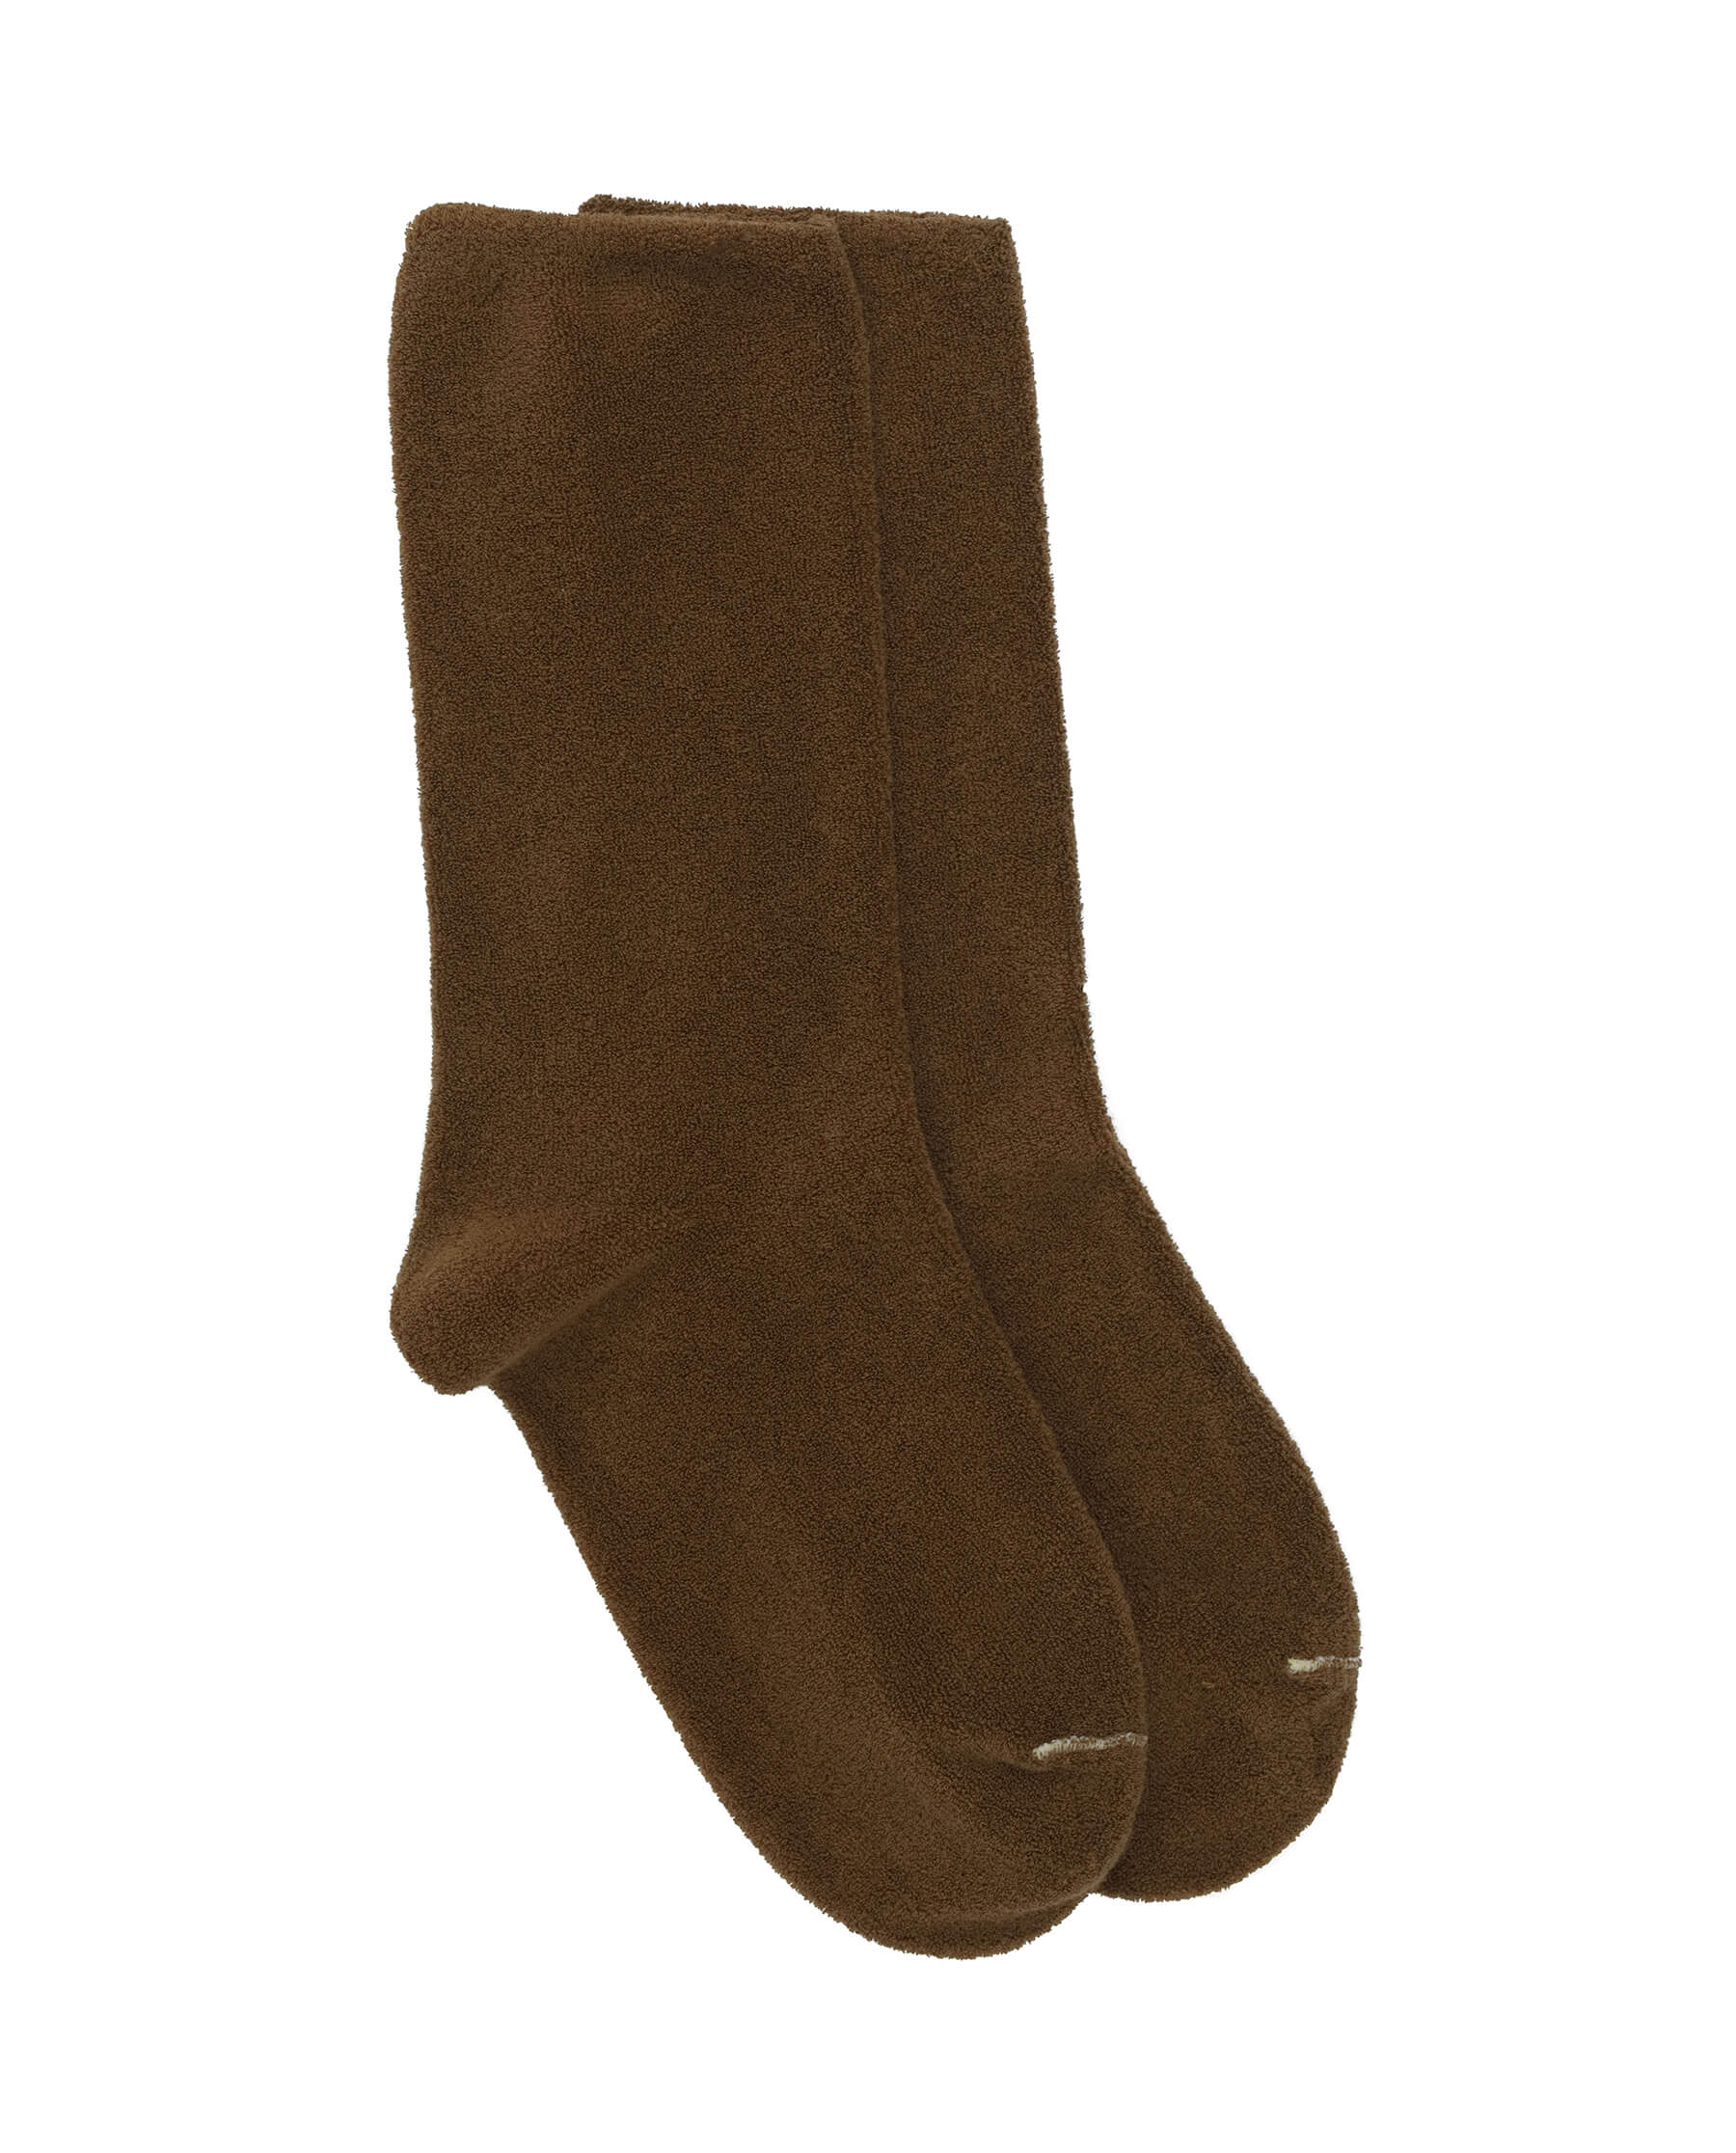 The Microterry Sock. -- Bronze SOCKS THE GREAT. SU23 MICROTERRY